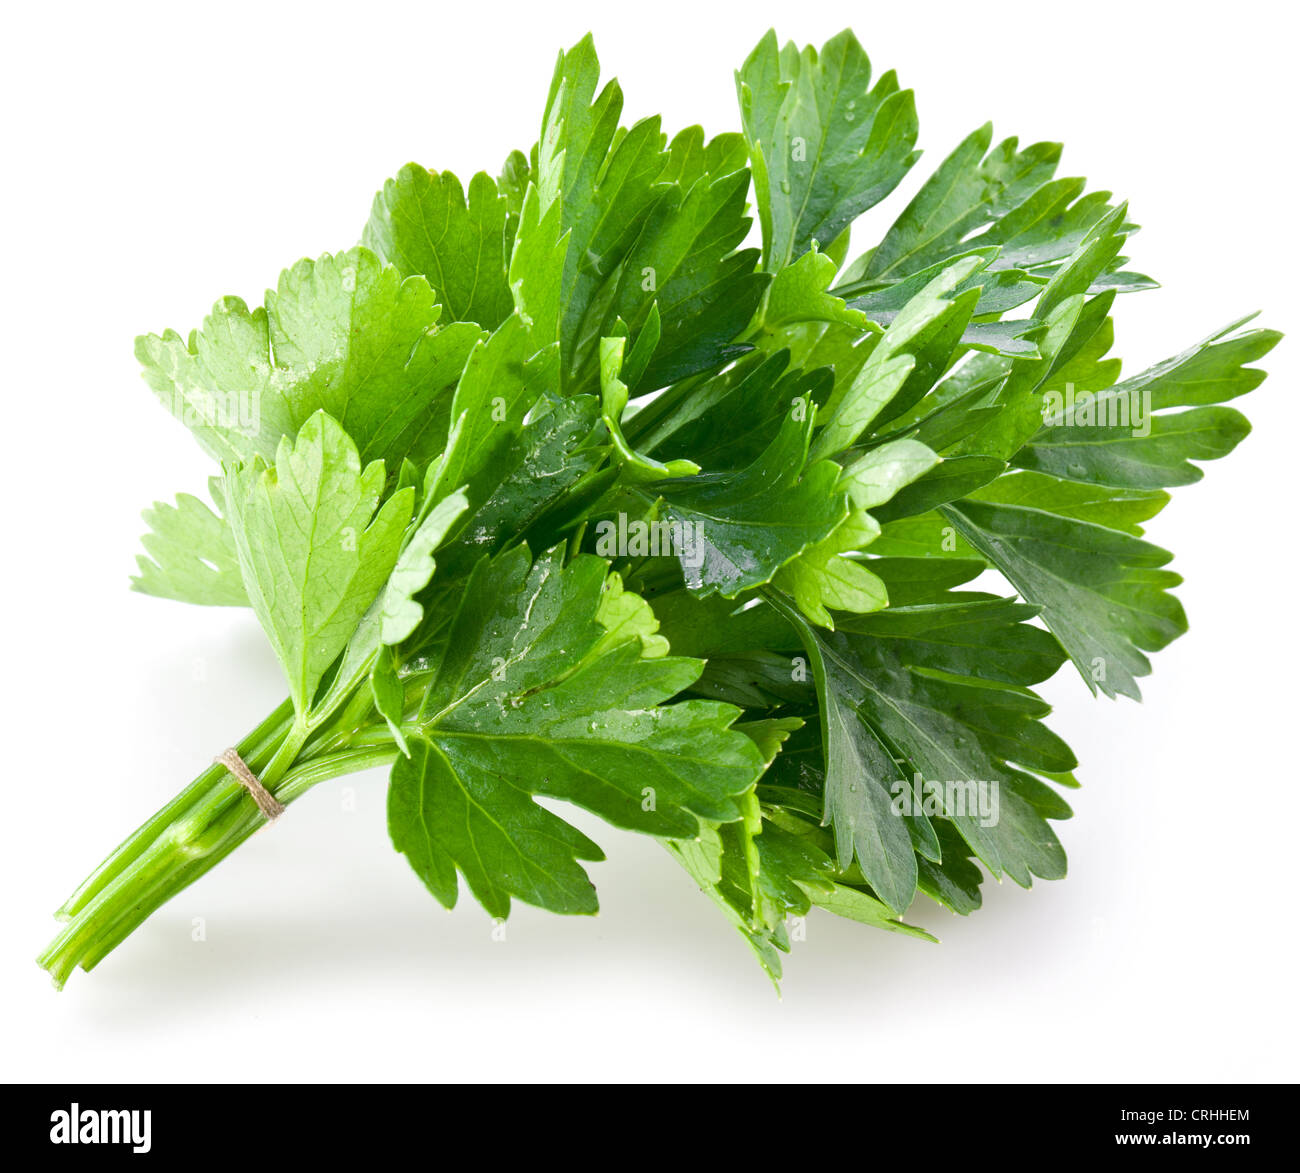 Bunch of green coriander on a white background. Stock Photo